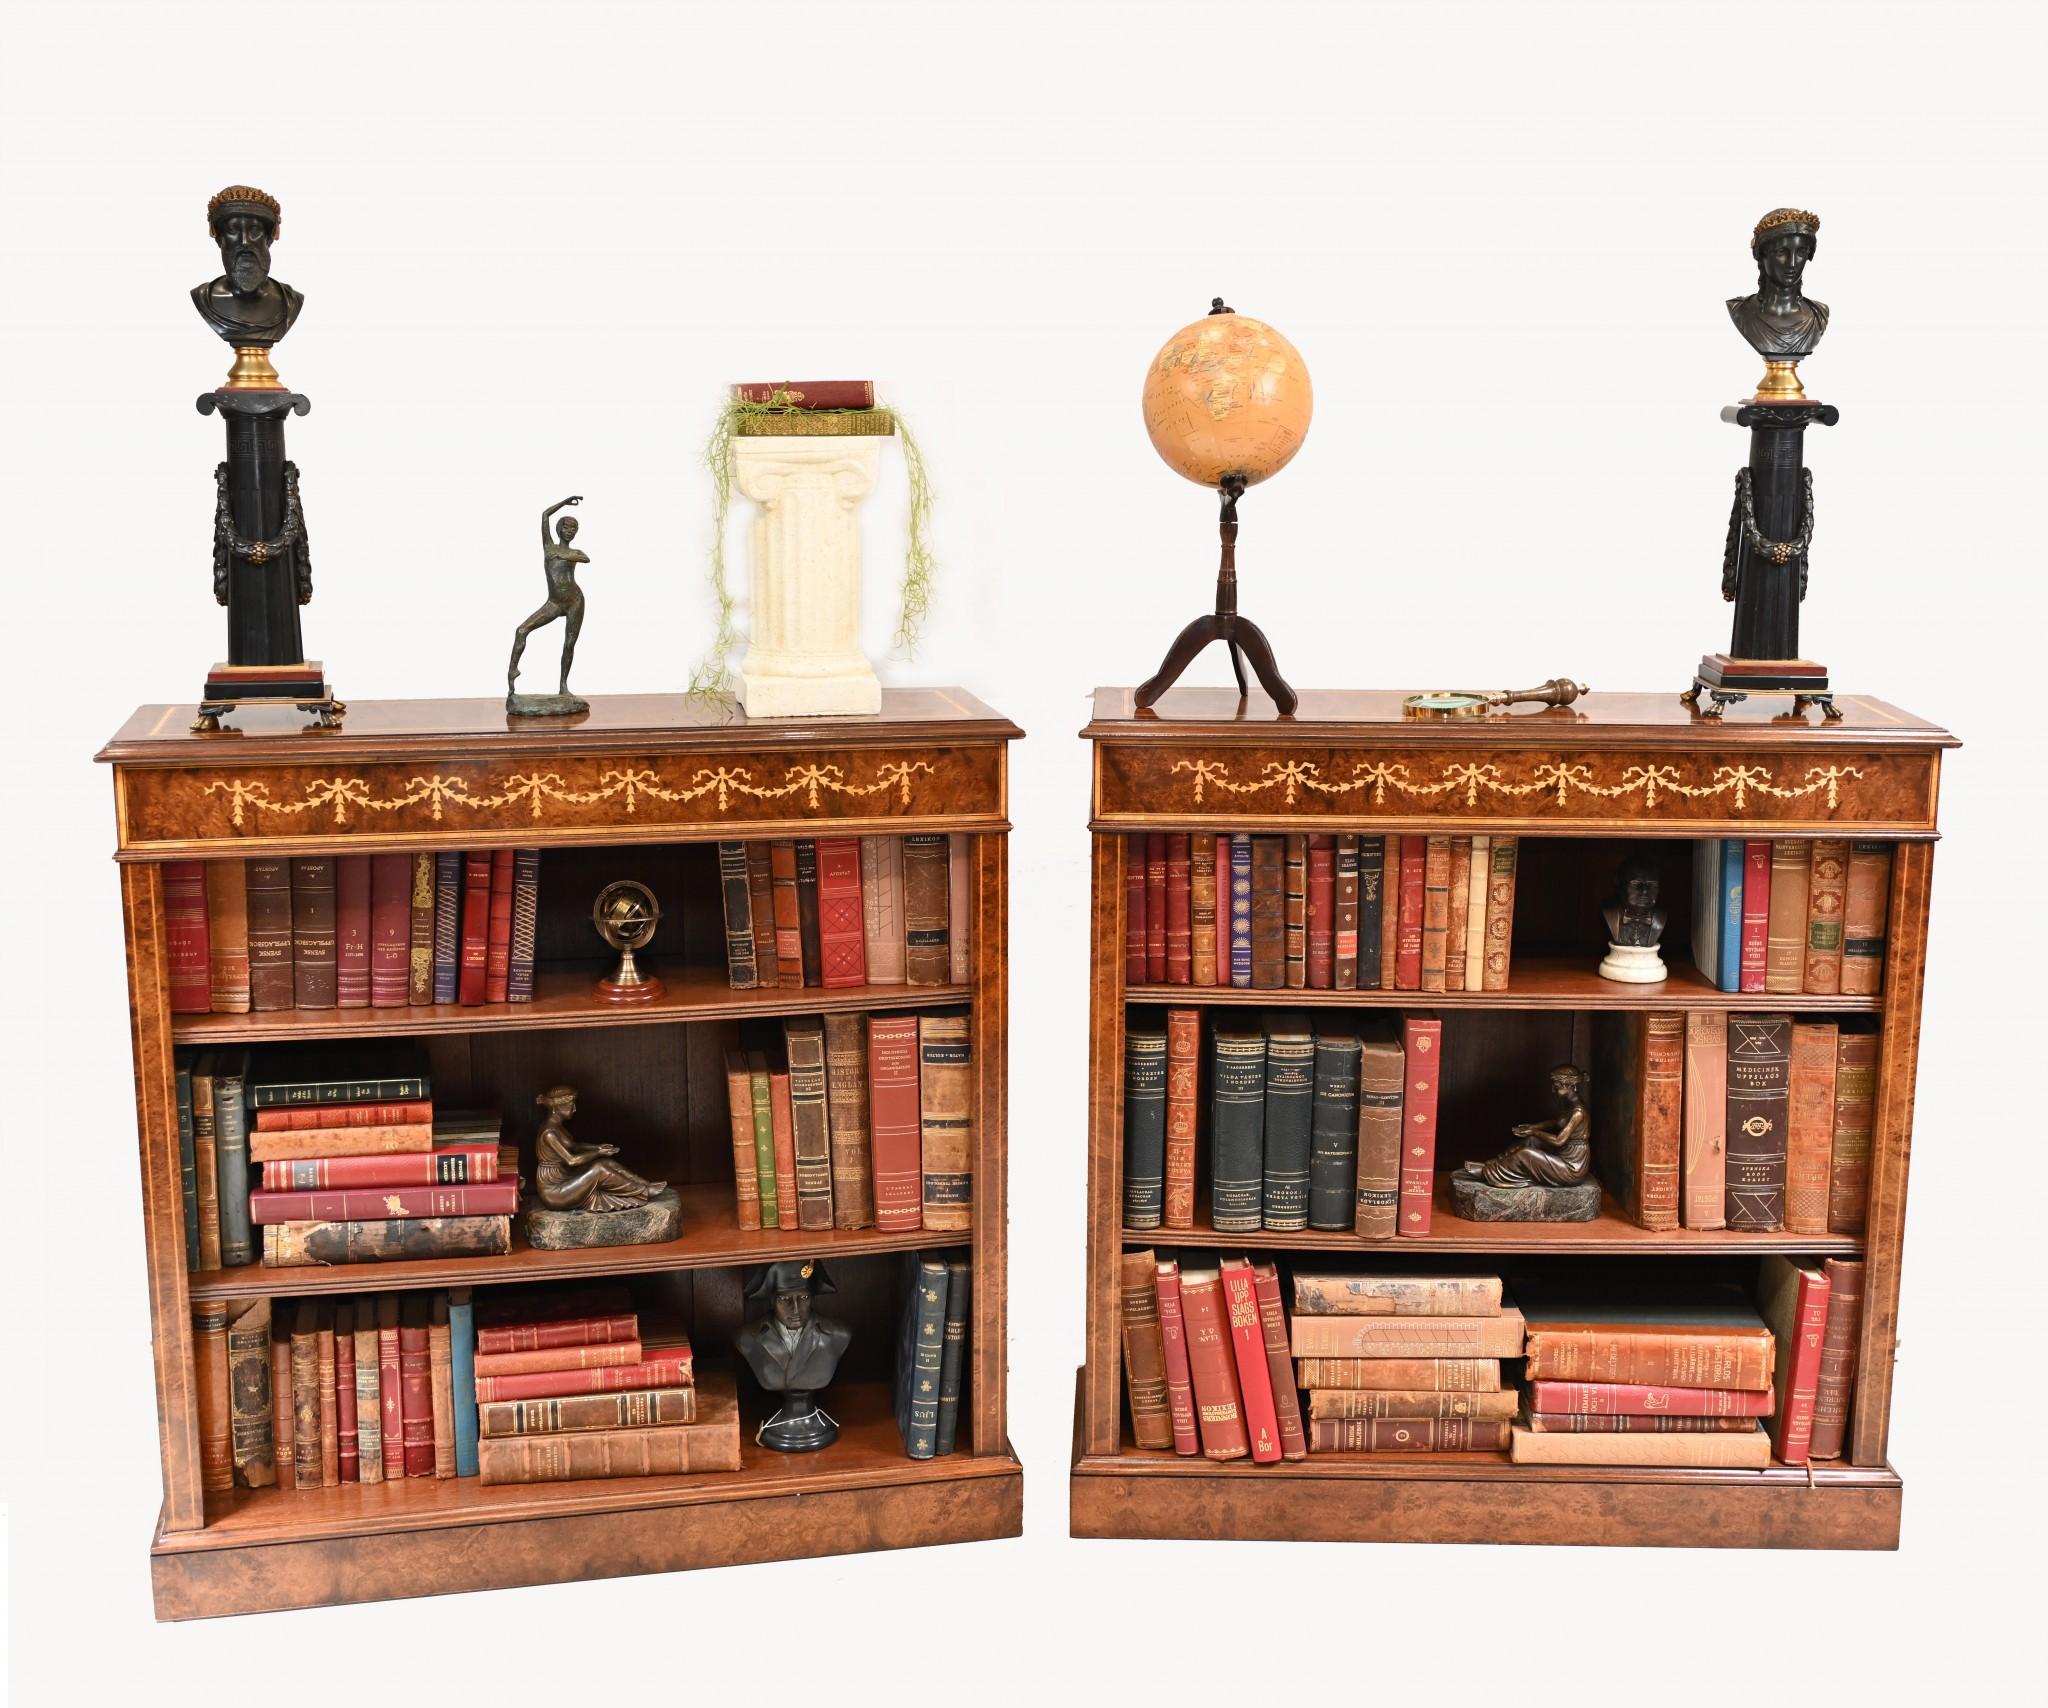 Viewings possible in our Hertfordshire warehouse - please contact for an appointment
Gorgeous pair of English Sheraton style low openfront bookcases hand crafted from walnut
Hand crafted in England to centuries old traditions - will last for many